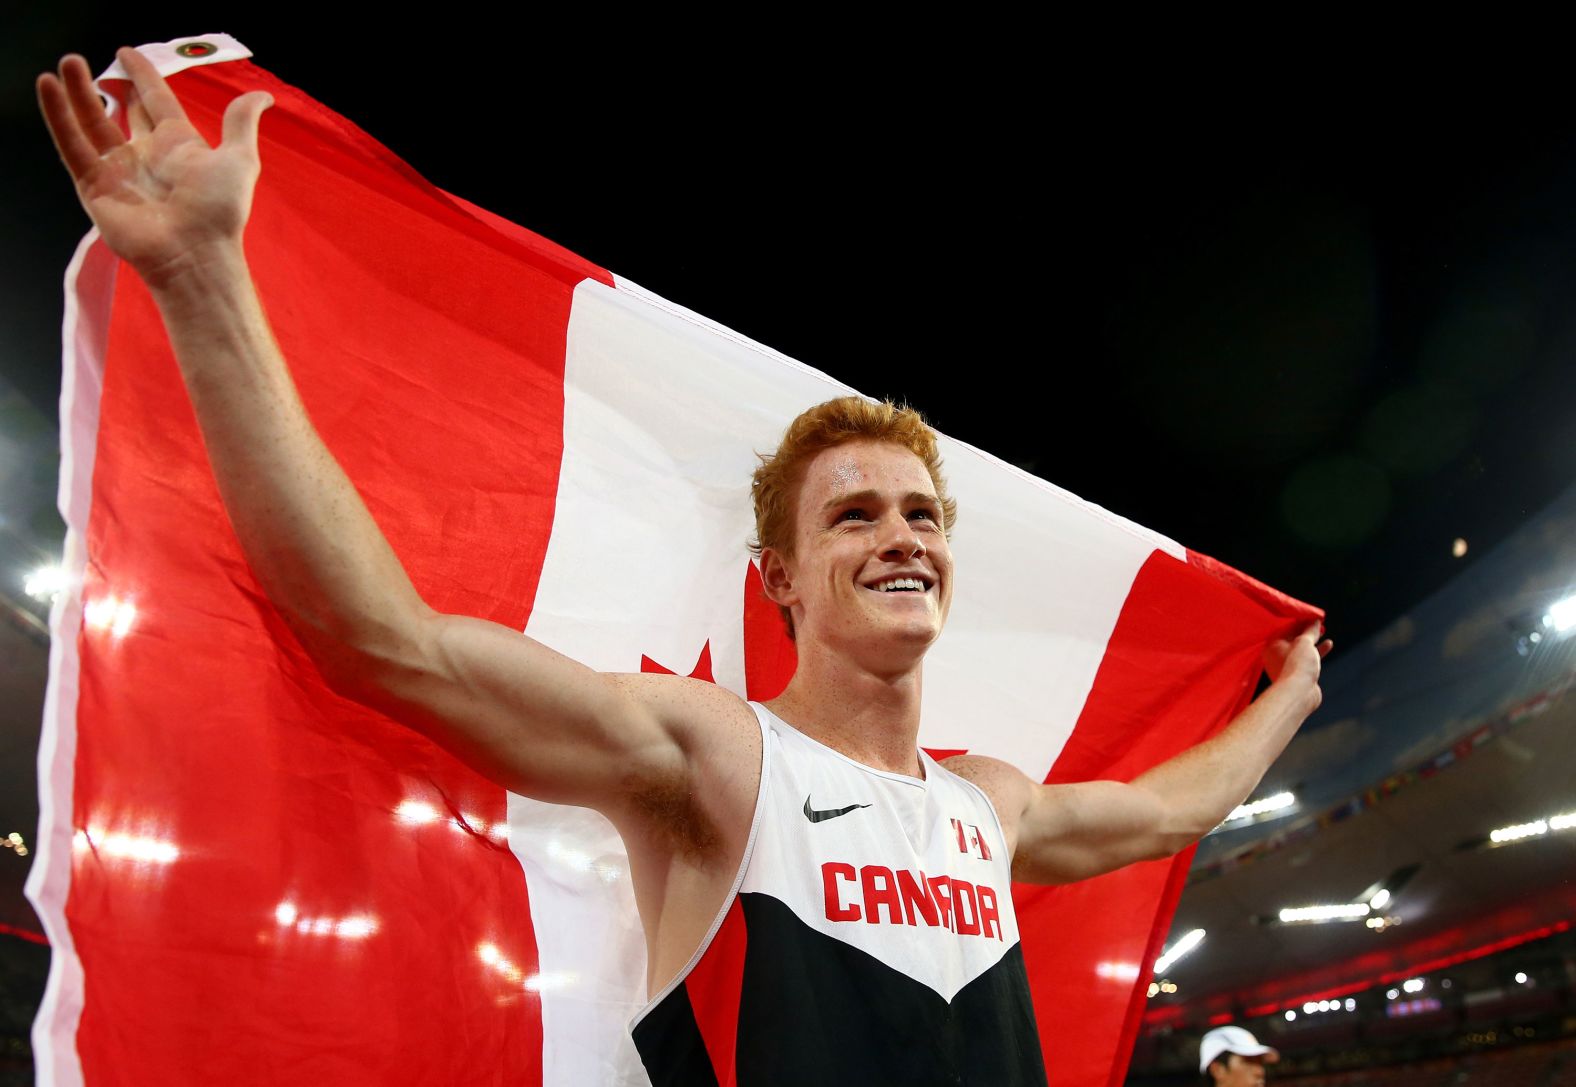 Canadian world champion pole vaulter <a href="https://www.cnn.com/2024/01/18/sport/shawn-barber-death-pole-vault/index.html" target="_blank">Shawn Barber</a> died January 17 at the age of 29, his agent Paul Doyle told CNN. Barber passed away from medical complications, according to a statement from the University of Akron's athletics department. "Barber had fallen ill and had been experiencing poor health for some time," the statement said.